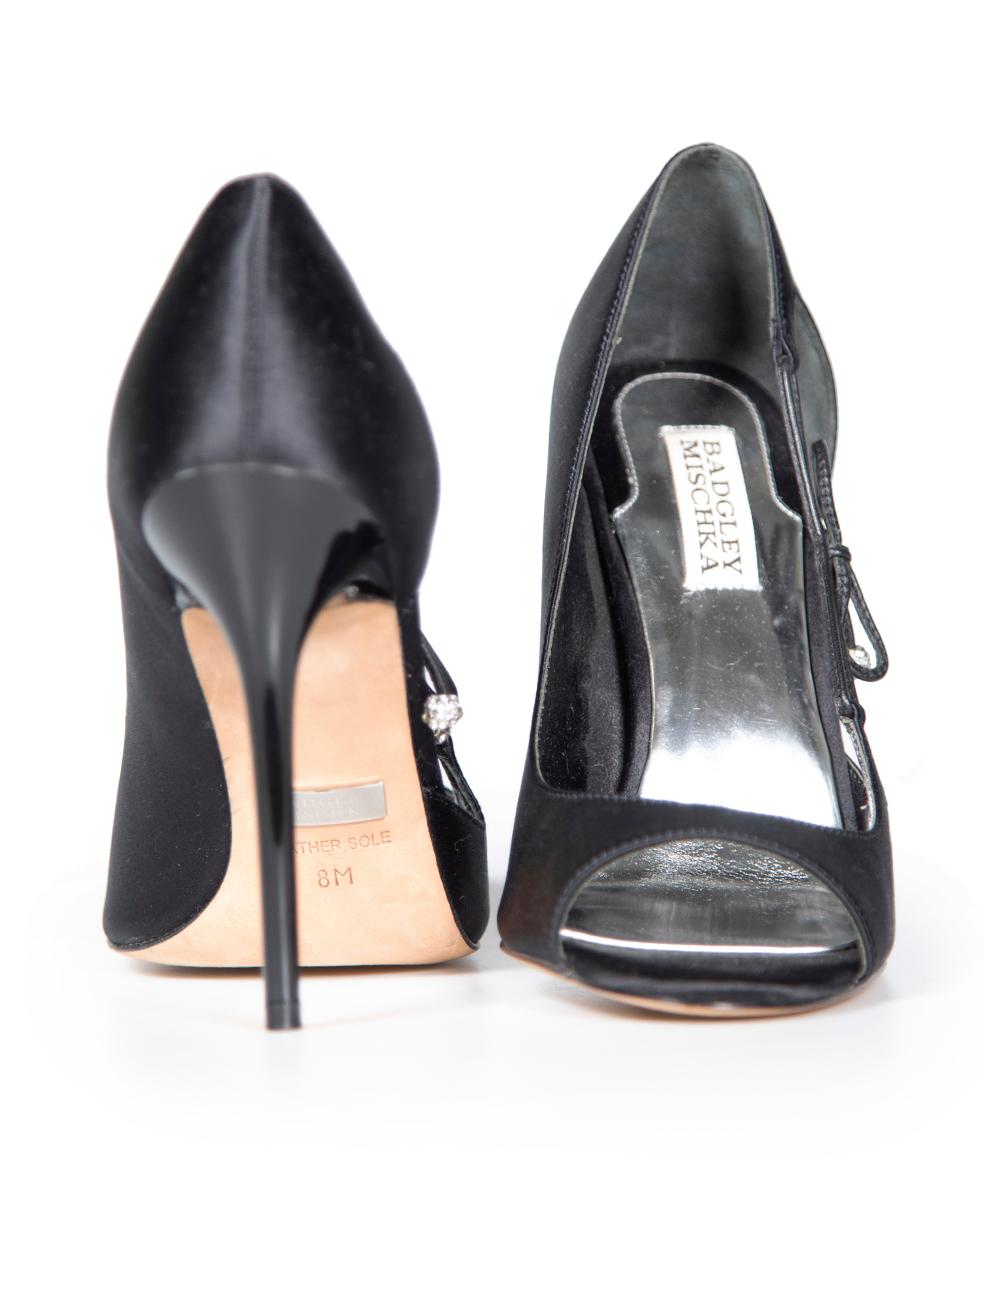 Badgley Mischka Black Satin Crystal Strap Heels Size US 8 In Good Condition For Sale In London, GB